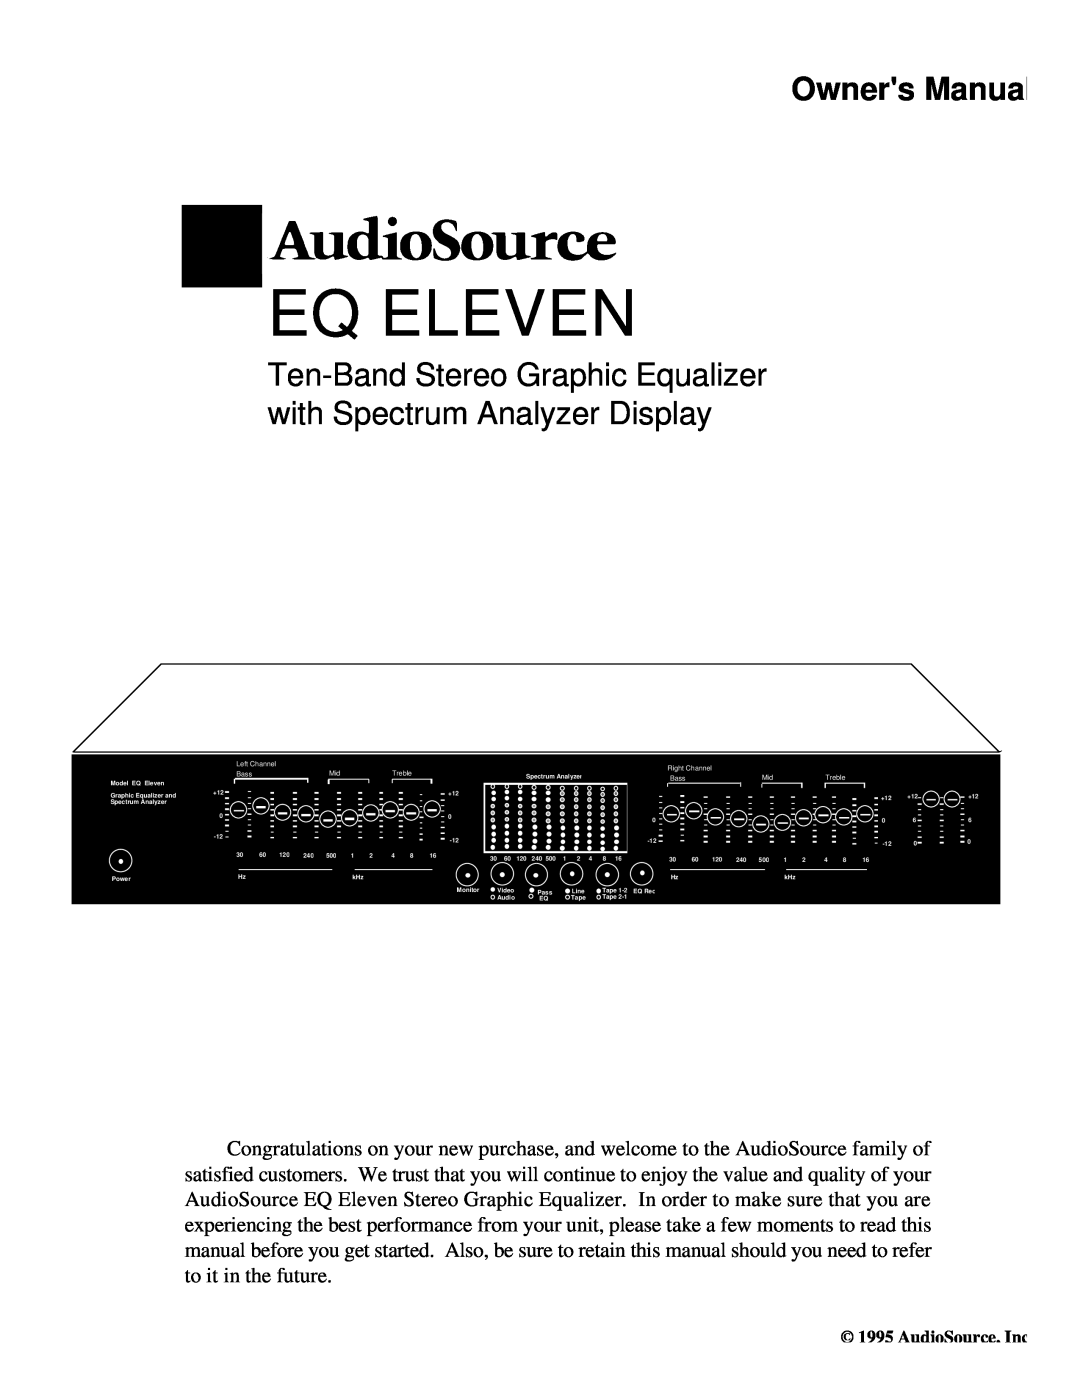 AudioSource Ten-Band Streo Graphic Equalizer with Spectrum Analyzer Display, EQ Eleven owner manual Eq Eleven 